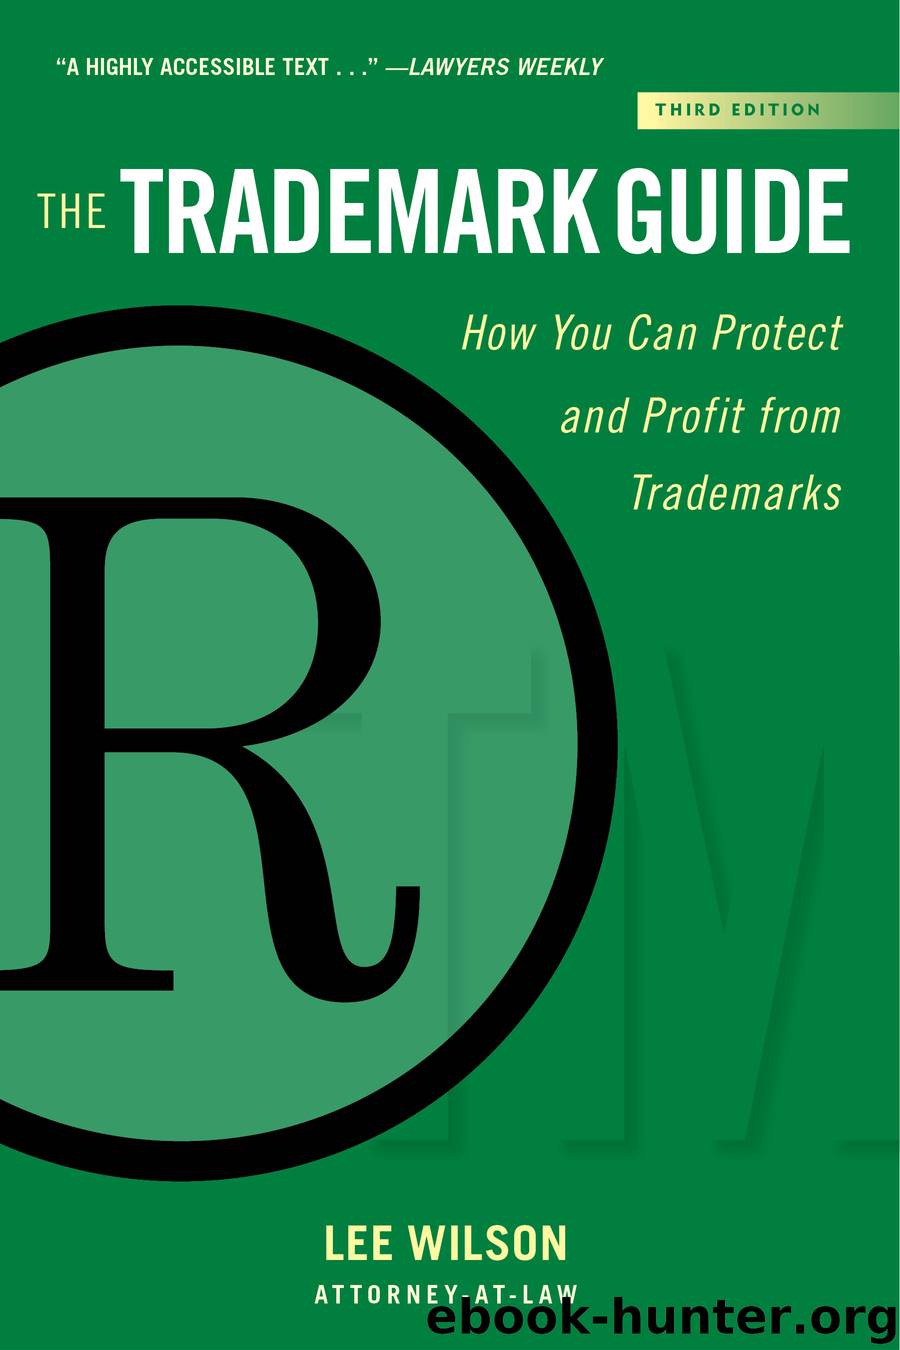 The Trademark Guide by Lee Wilson